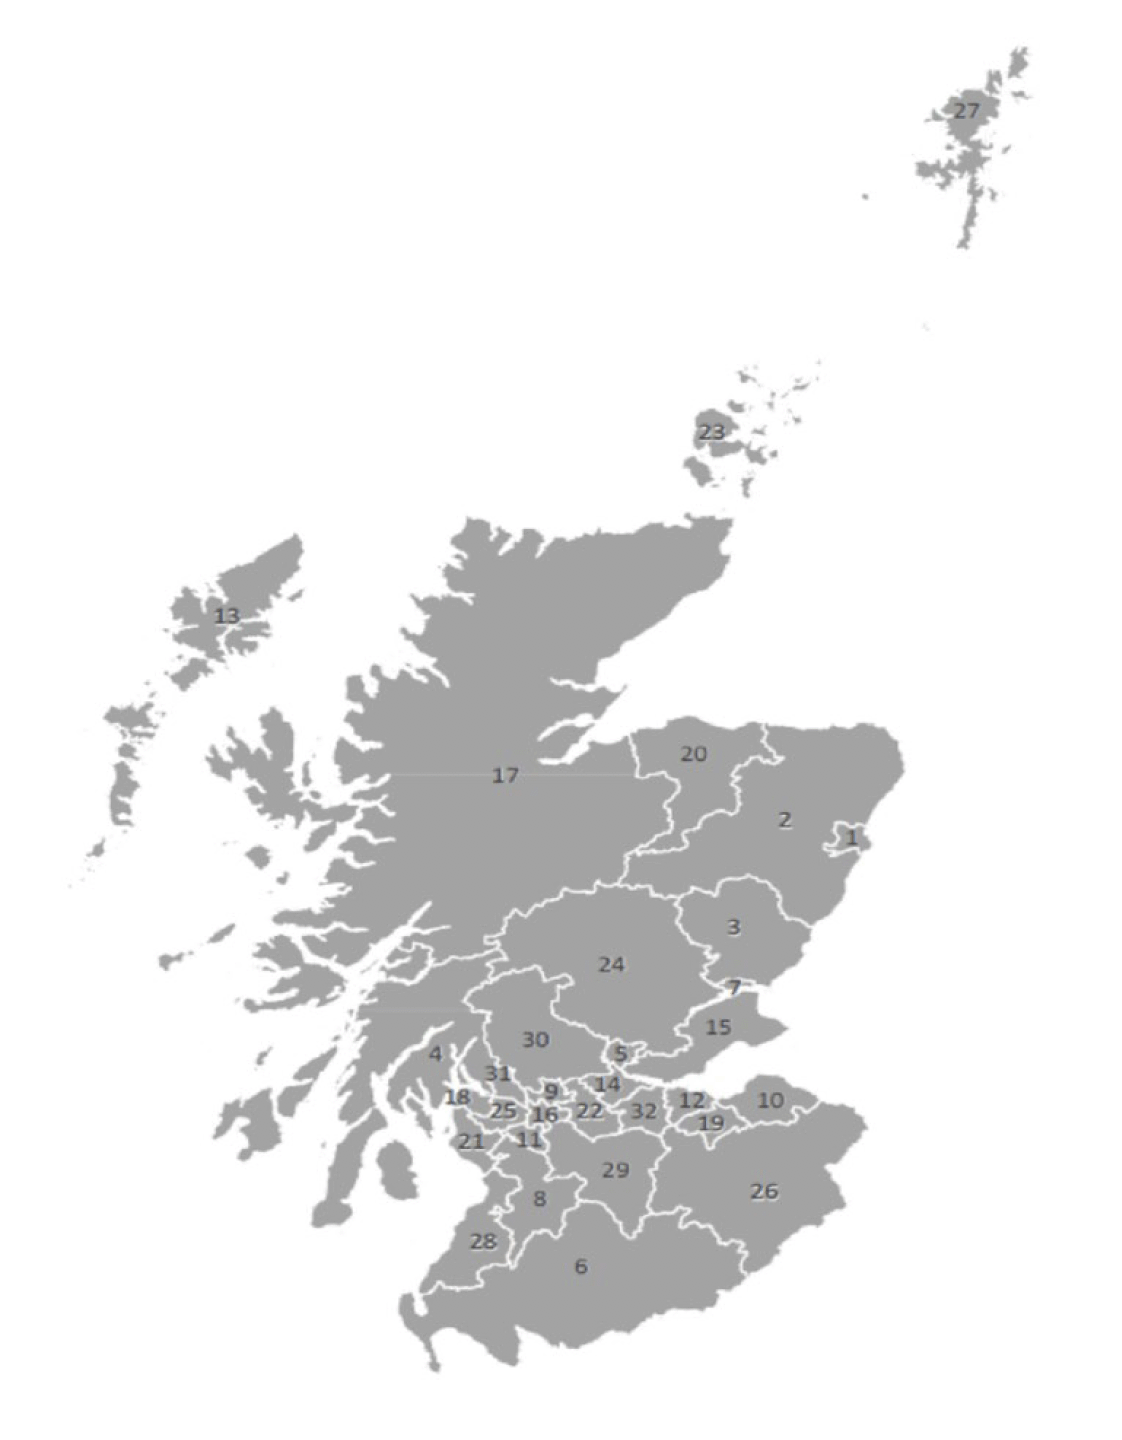 Figure 1 Map of Scotland showing local authority boundaries.